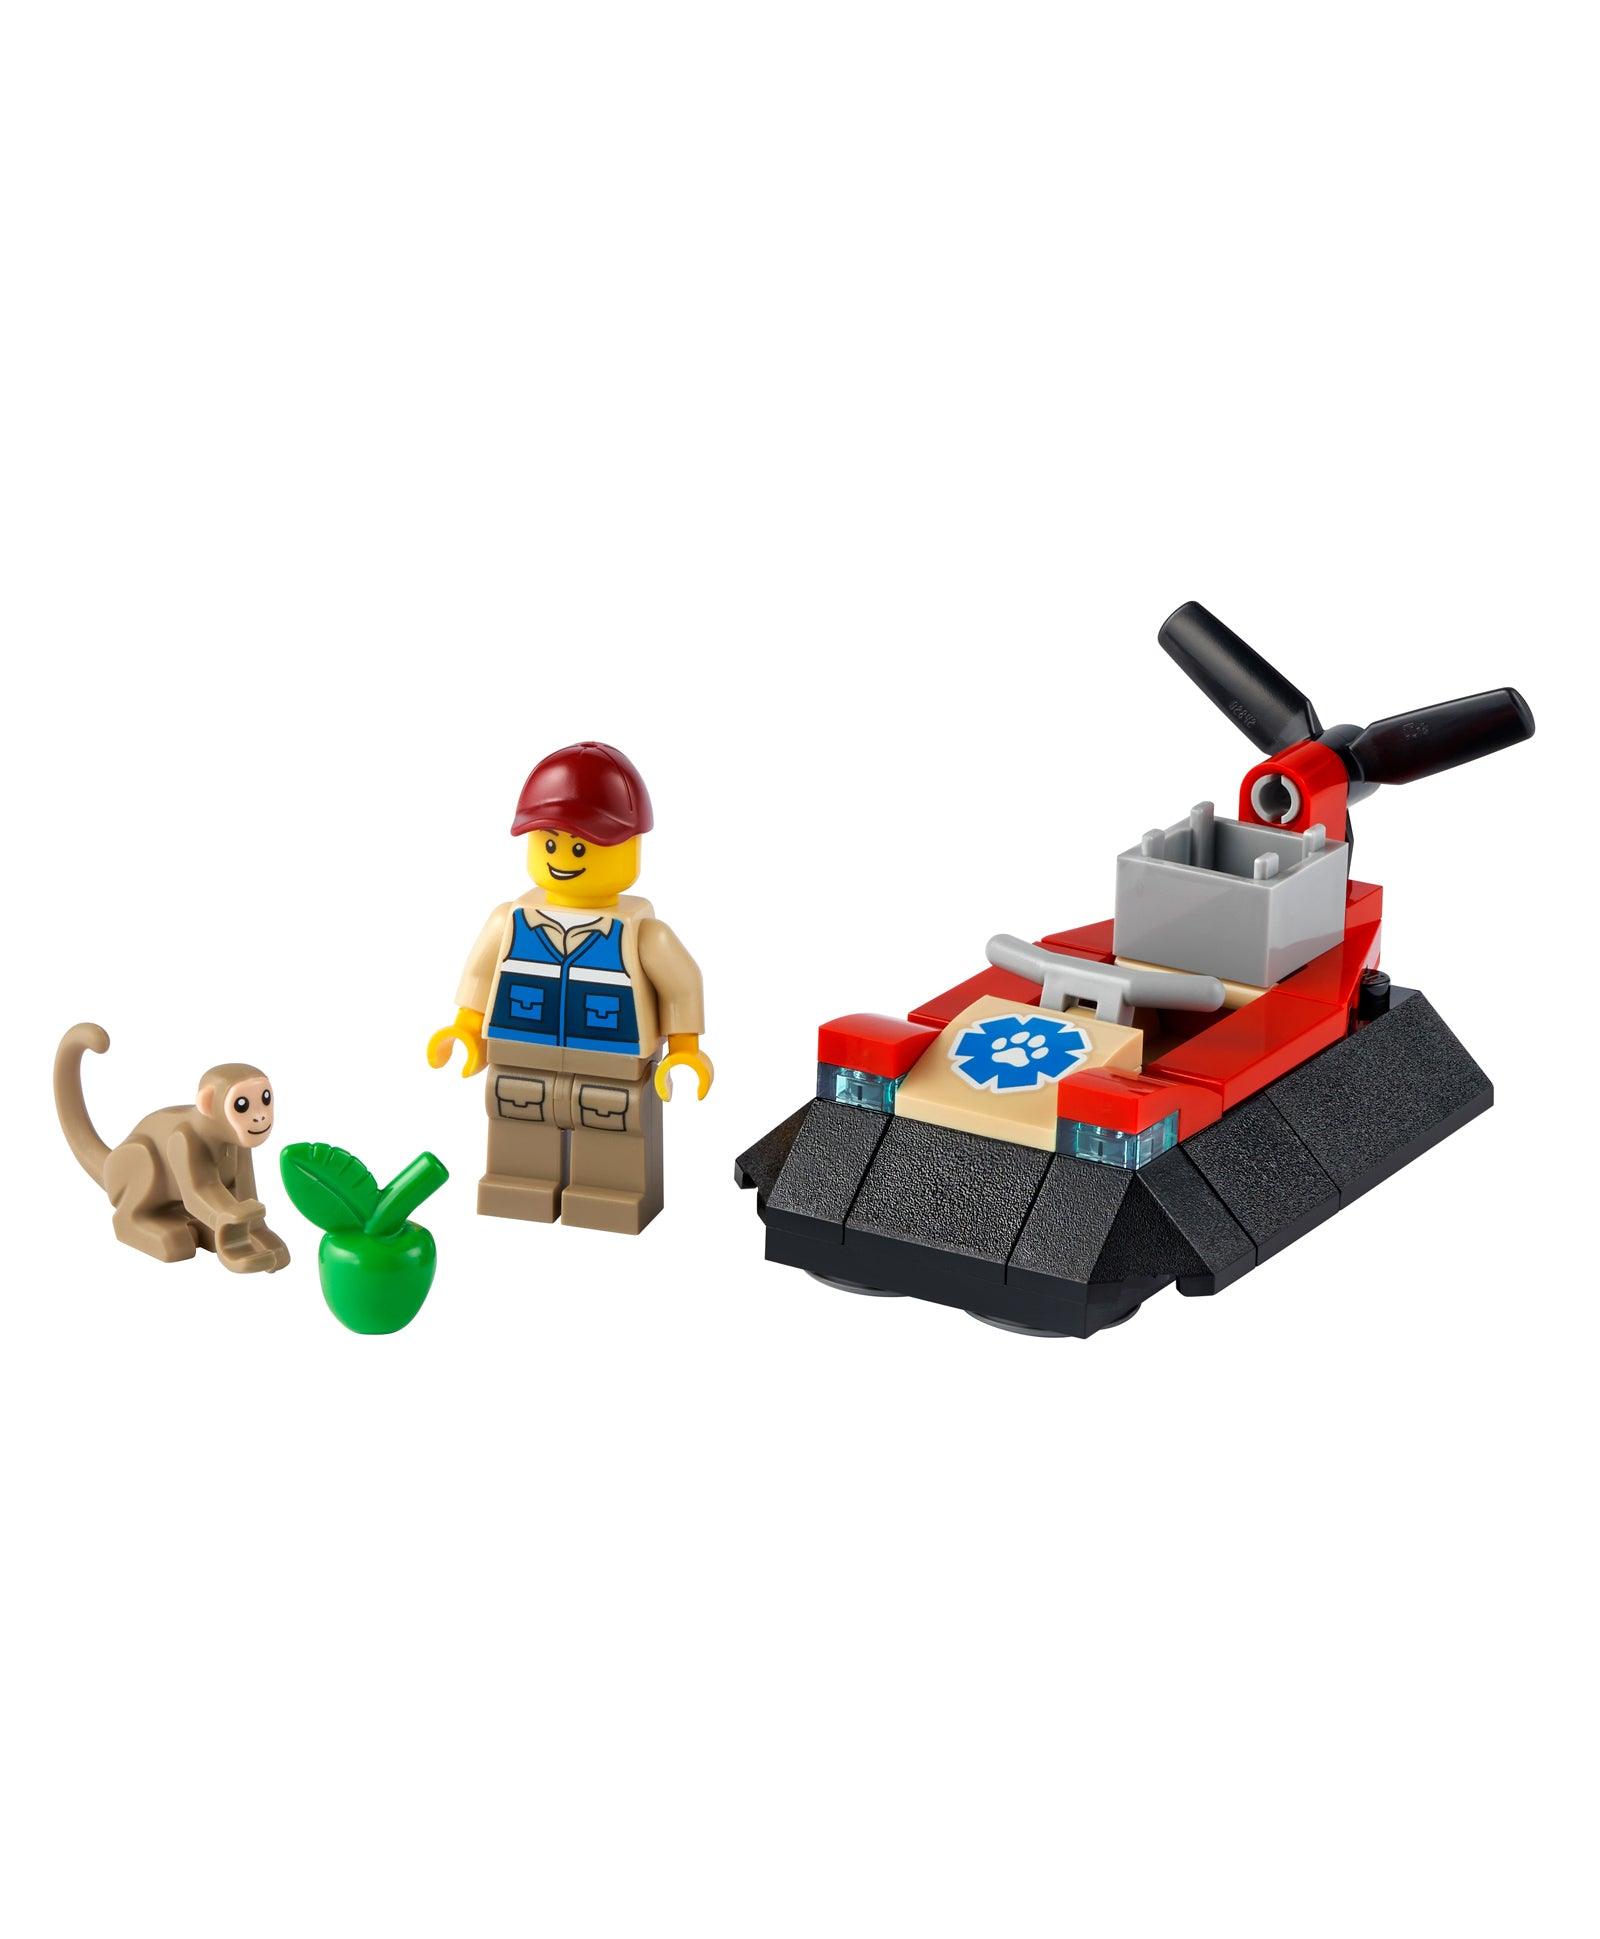 LEGO City Wildlife Rescue Hovercraft Building Kit for Ages 5+ - FunCorp India